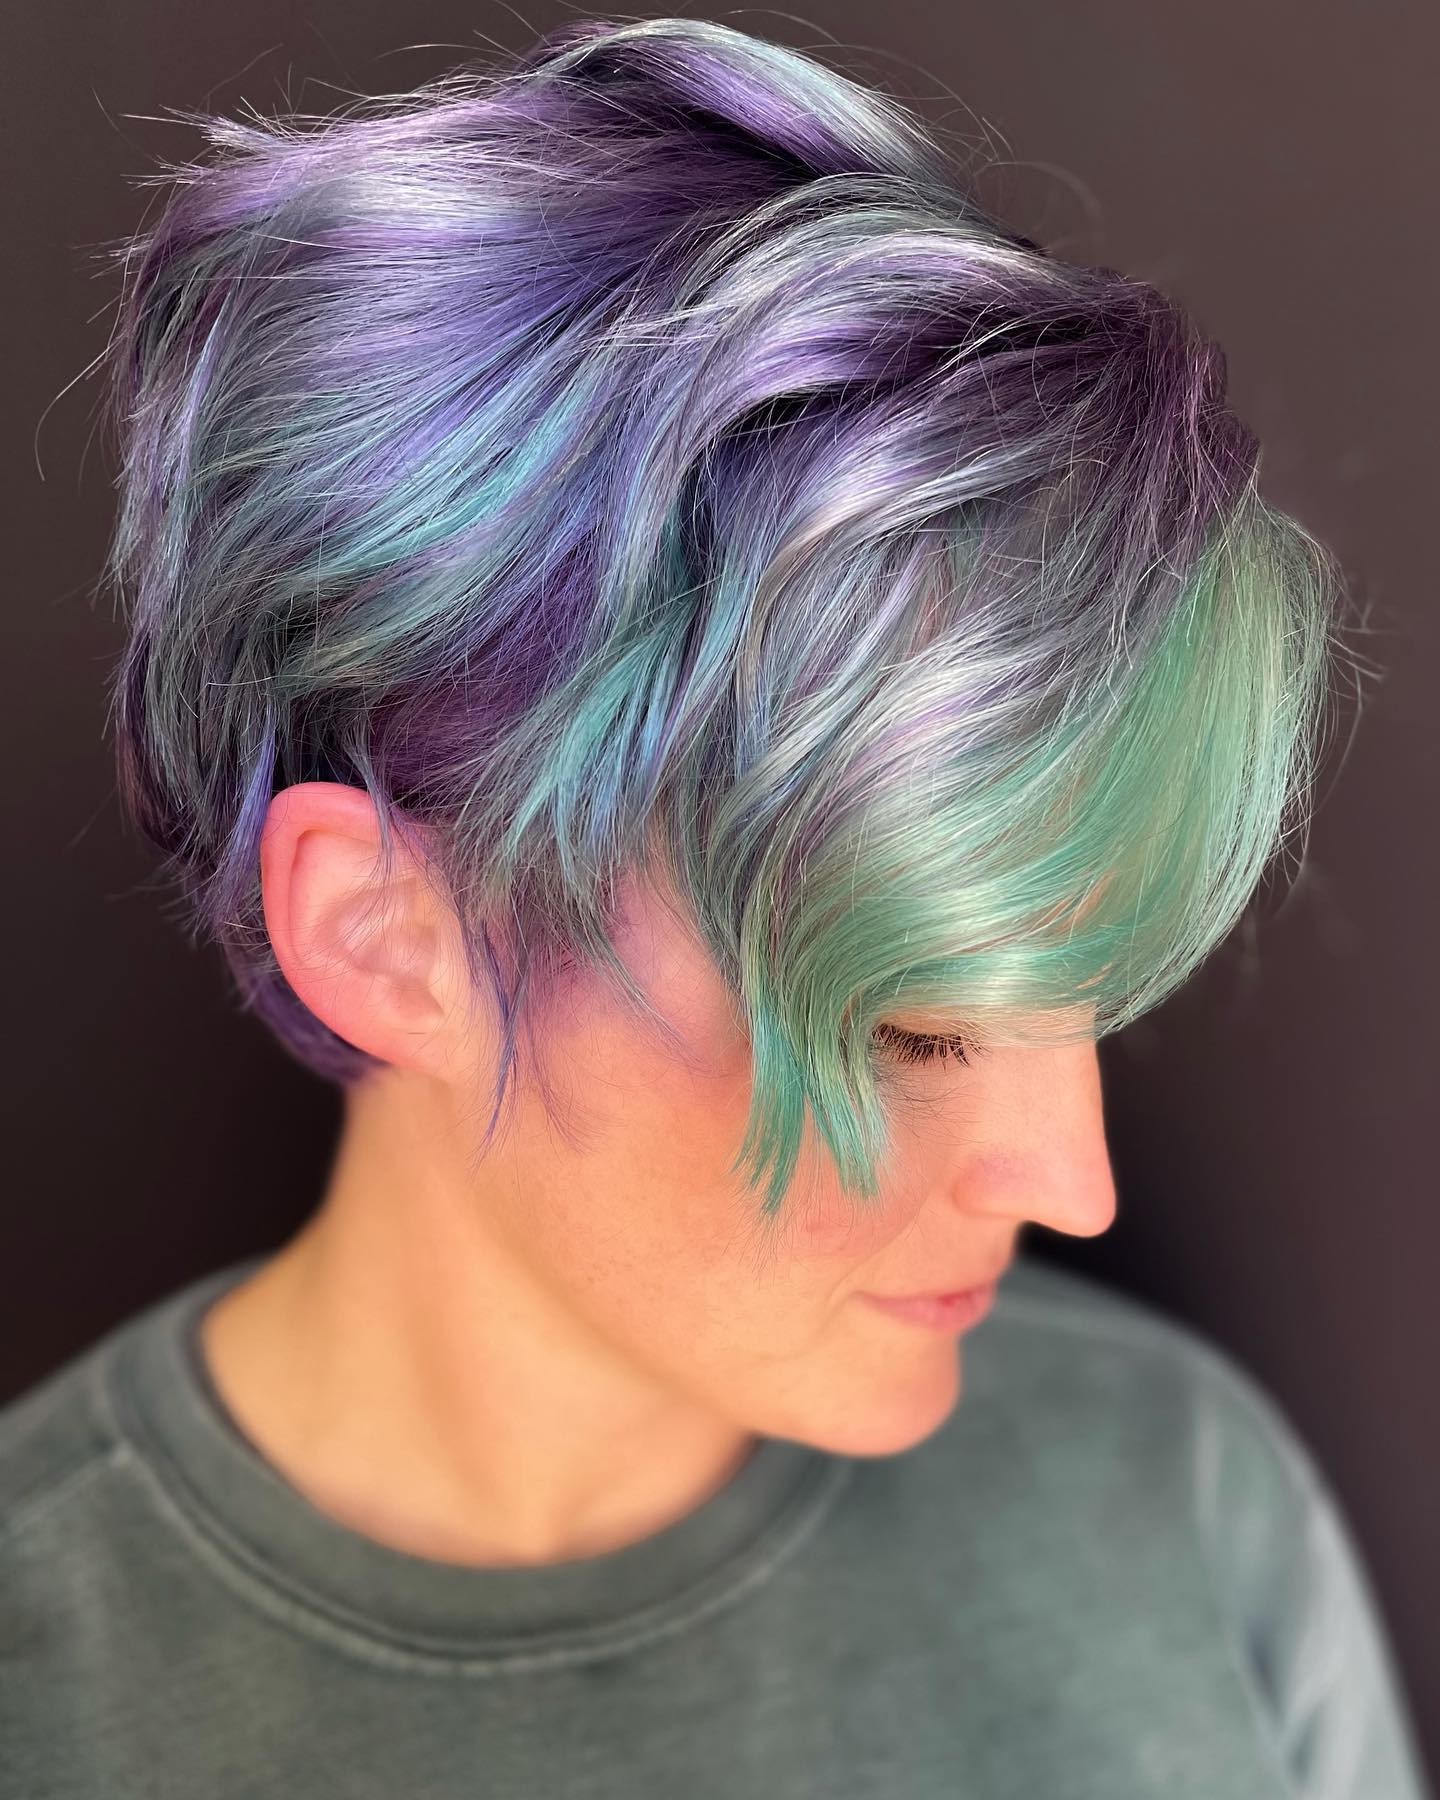 Rainbow Shades on Pixie Cut with Turquoise Bang